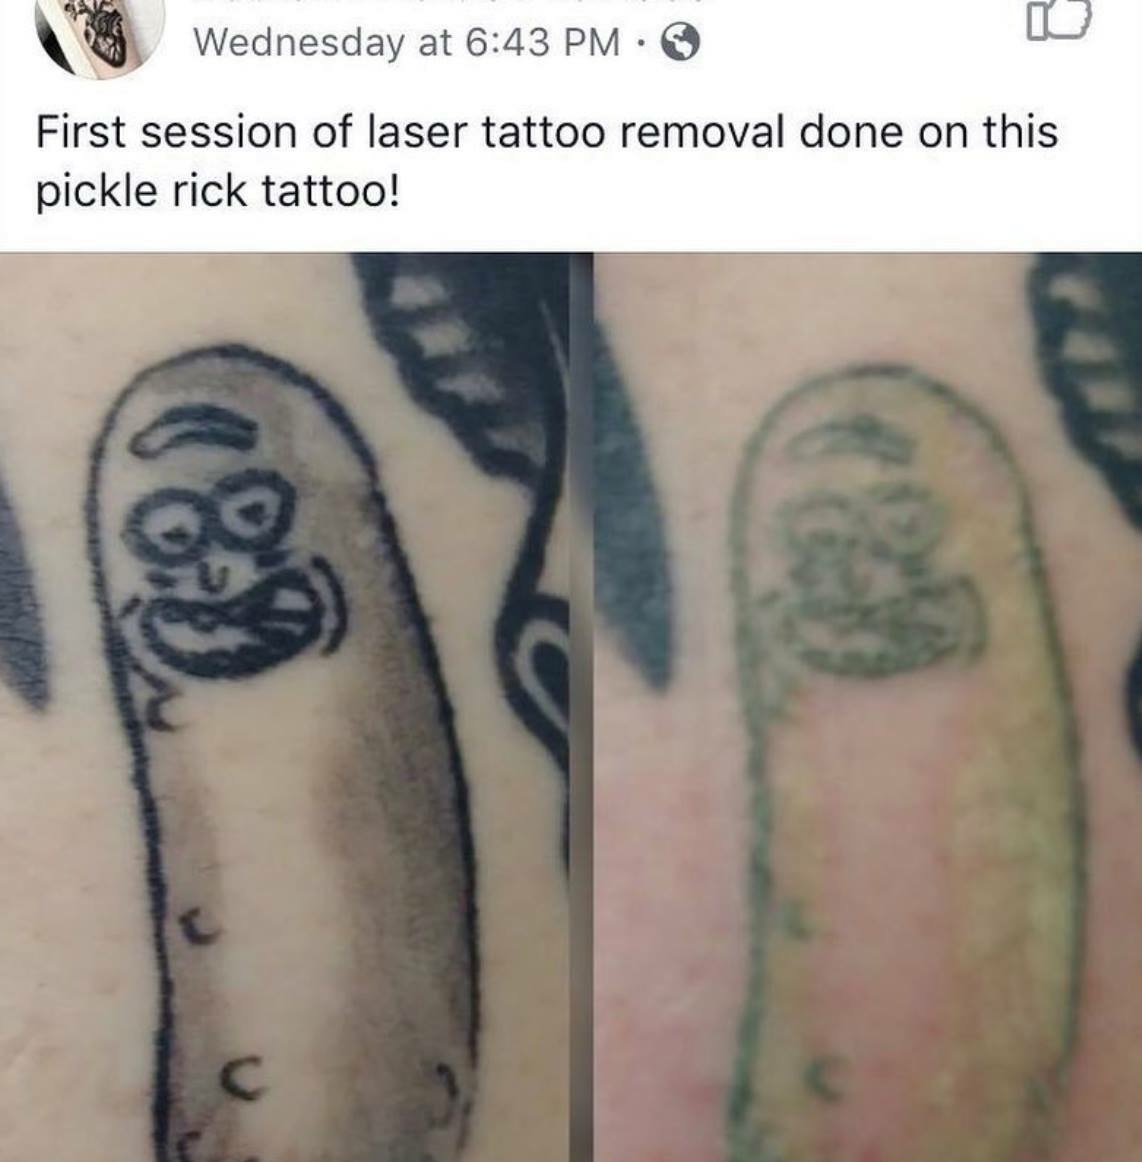 amazing picture of pickle rick tattoo removal - Wednesday at First session of laser tattoo removal done on this pickle rick tattoo!